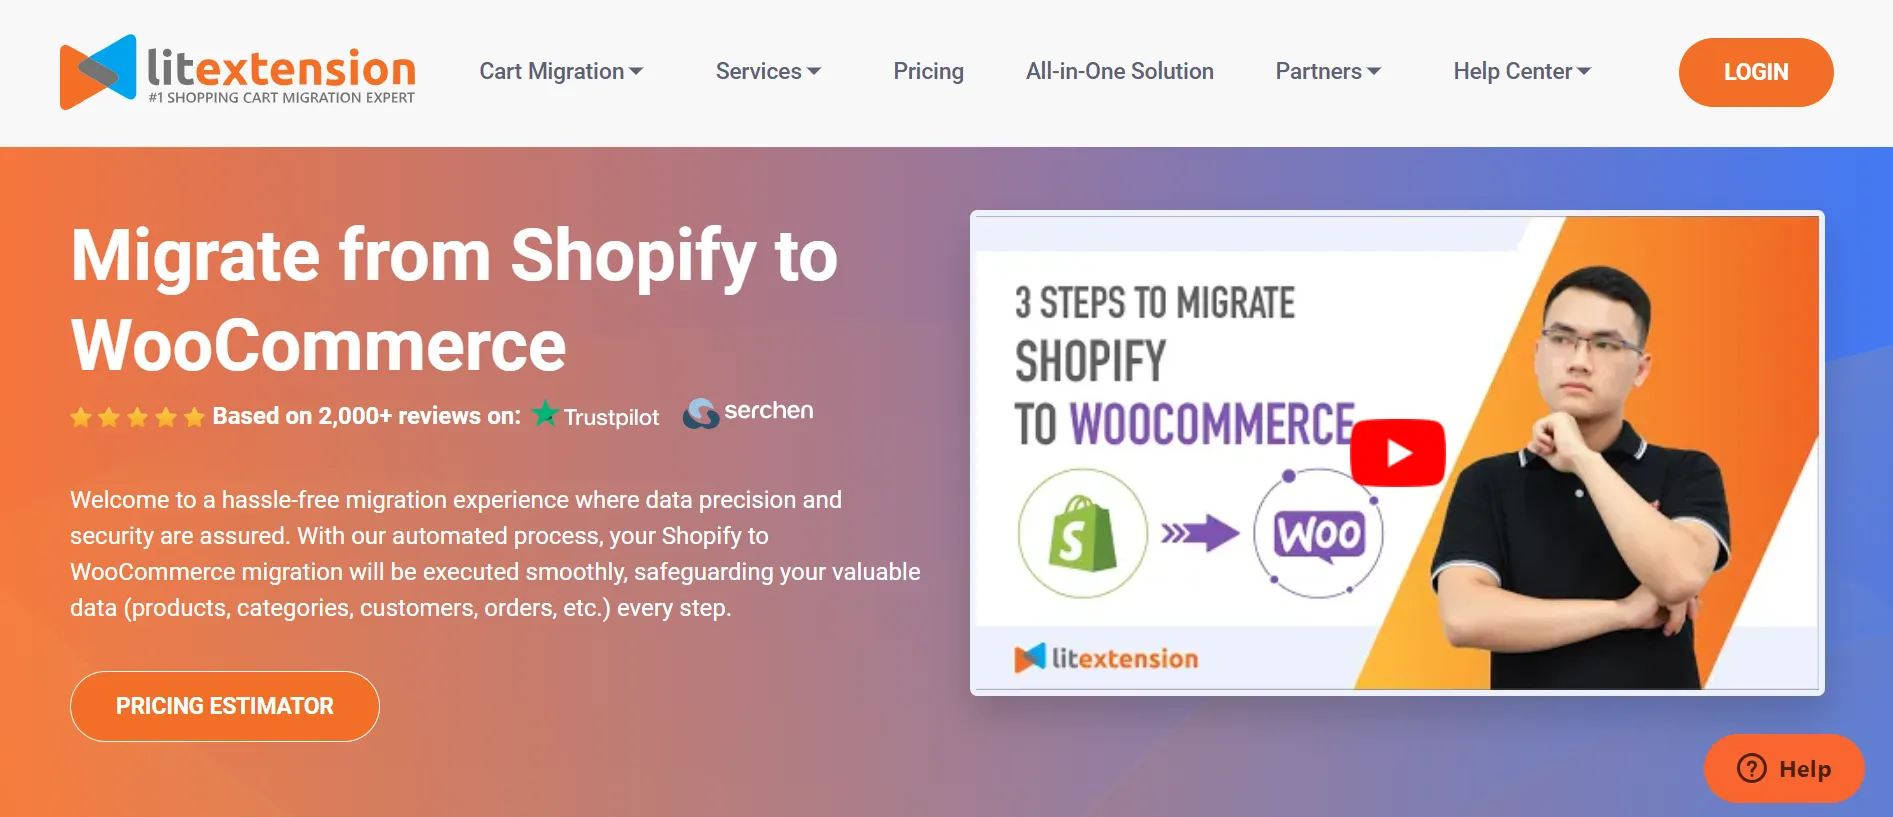 Shopify to WooCommerce with LitExtension